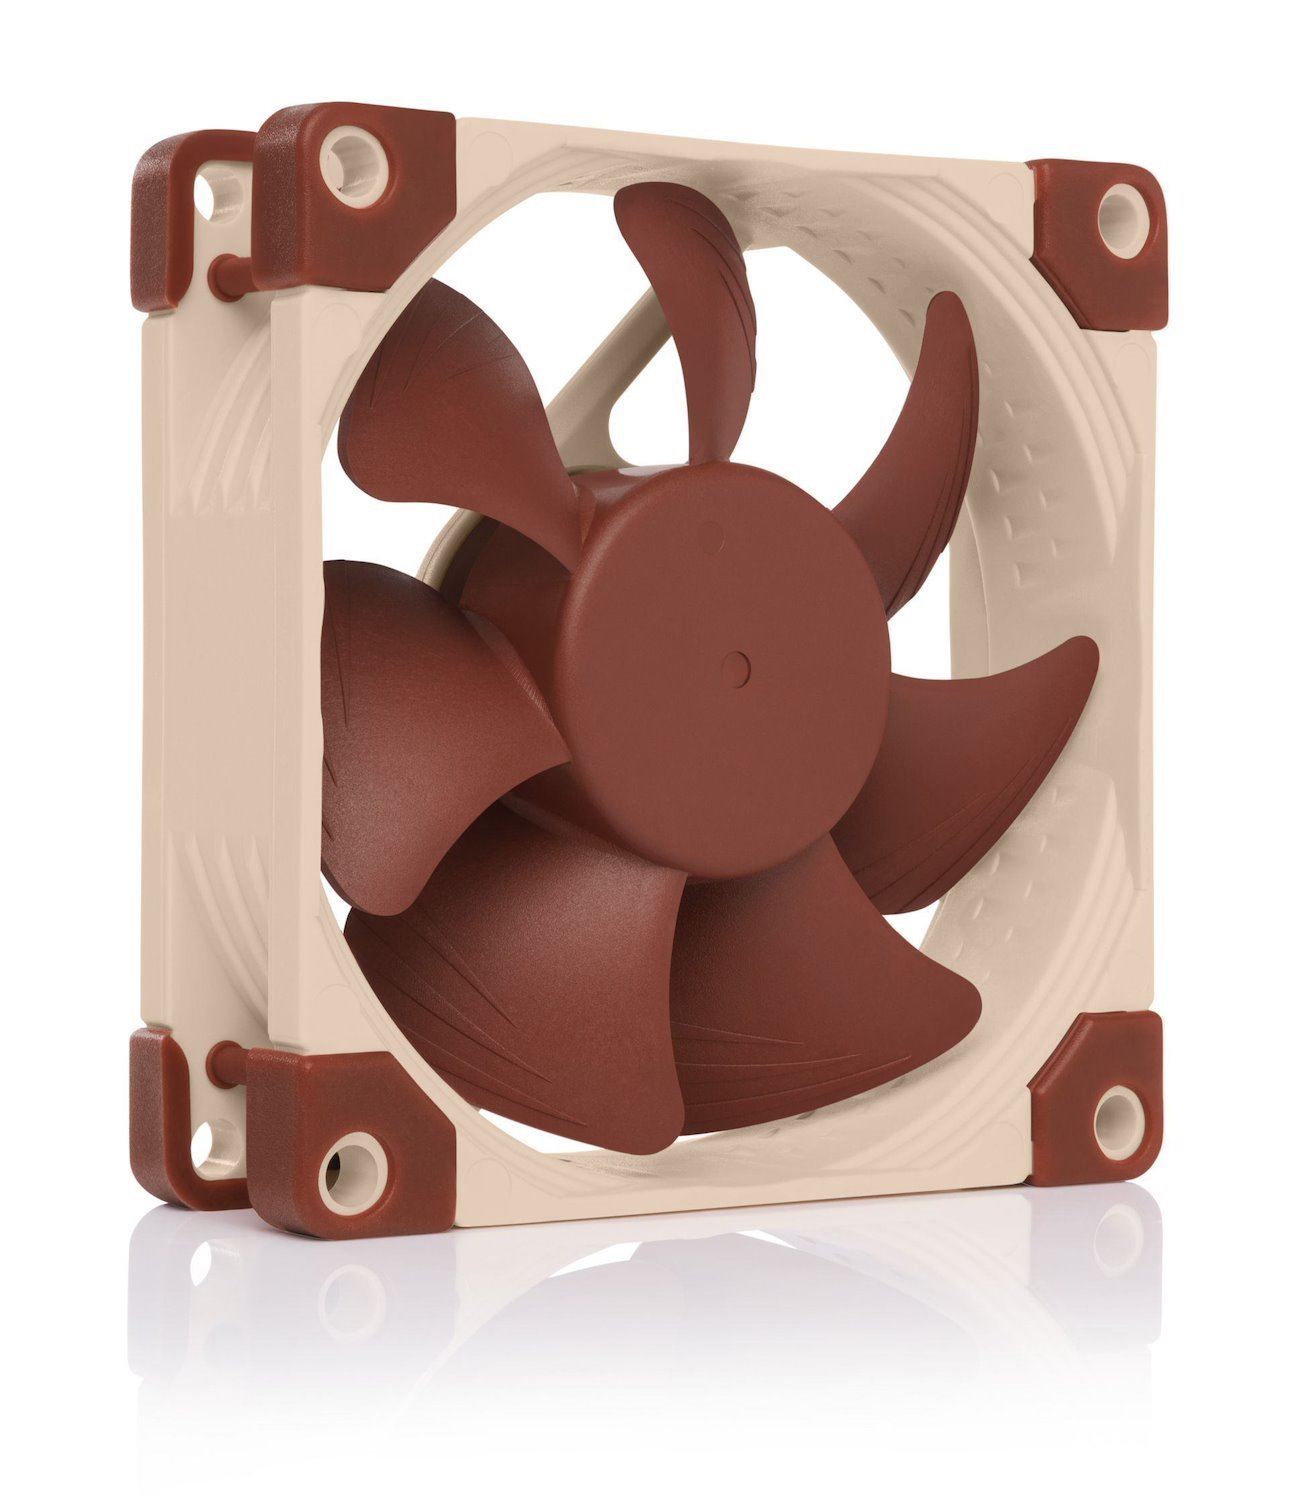 Noctua Nf-A8 PWM Computer Cooling System Computer Case Fan 8 CM Beige Brown (Noctua Nf-A8 PWM Fan - 80MM)